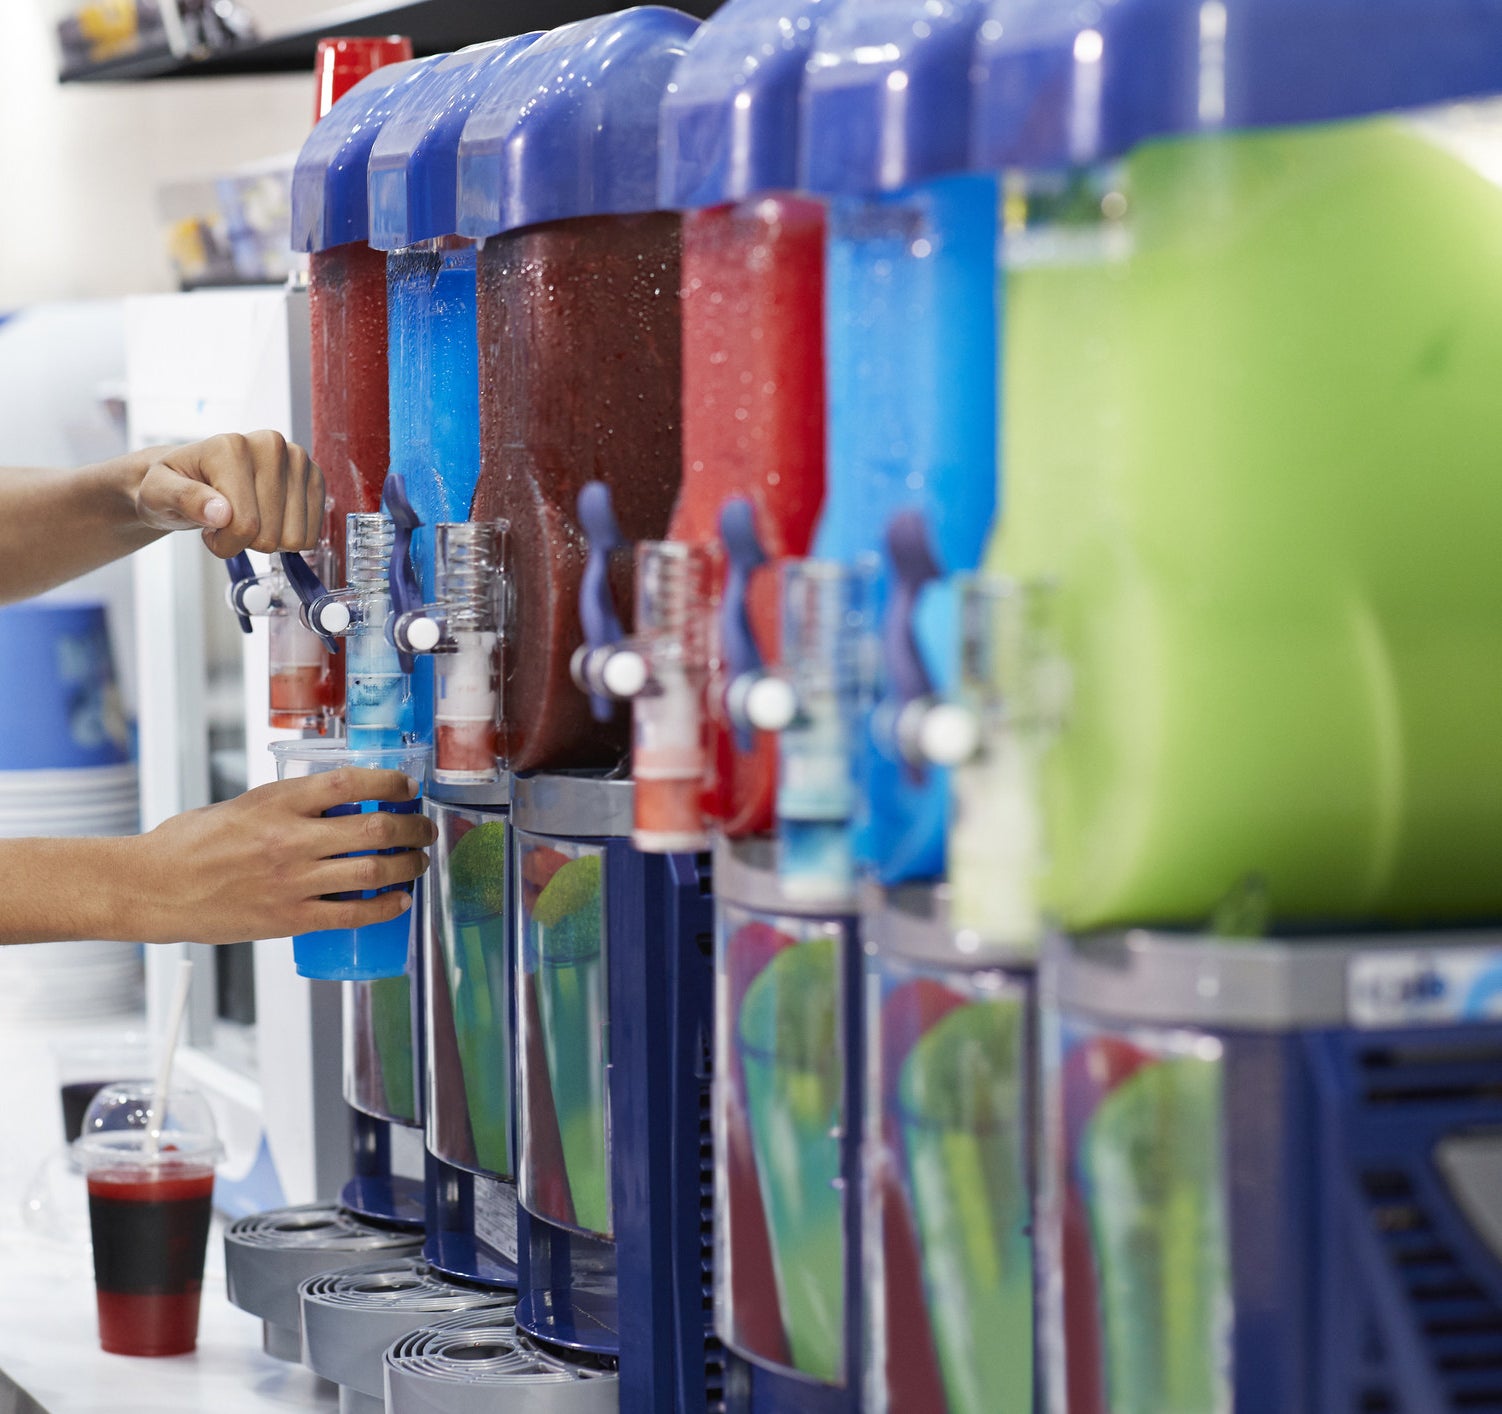 Machines full of colorful soft drinks